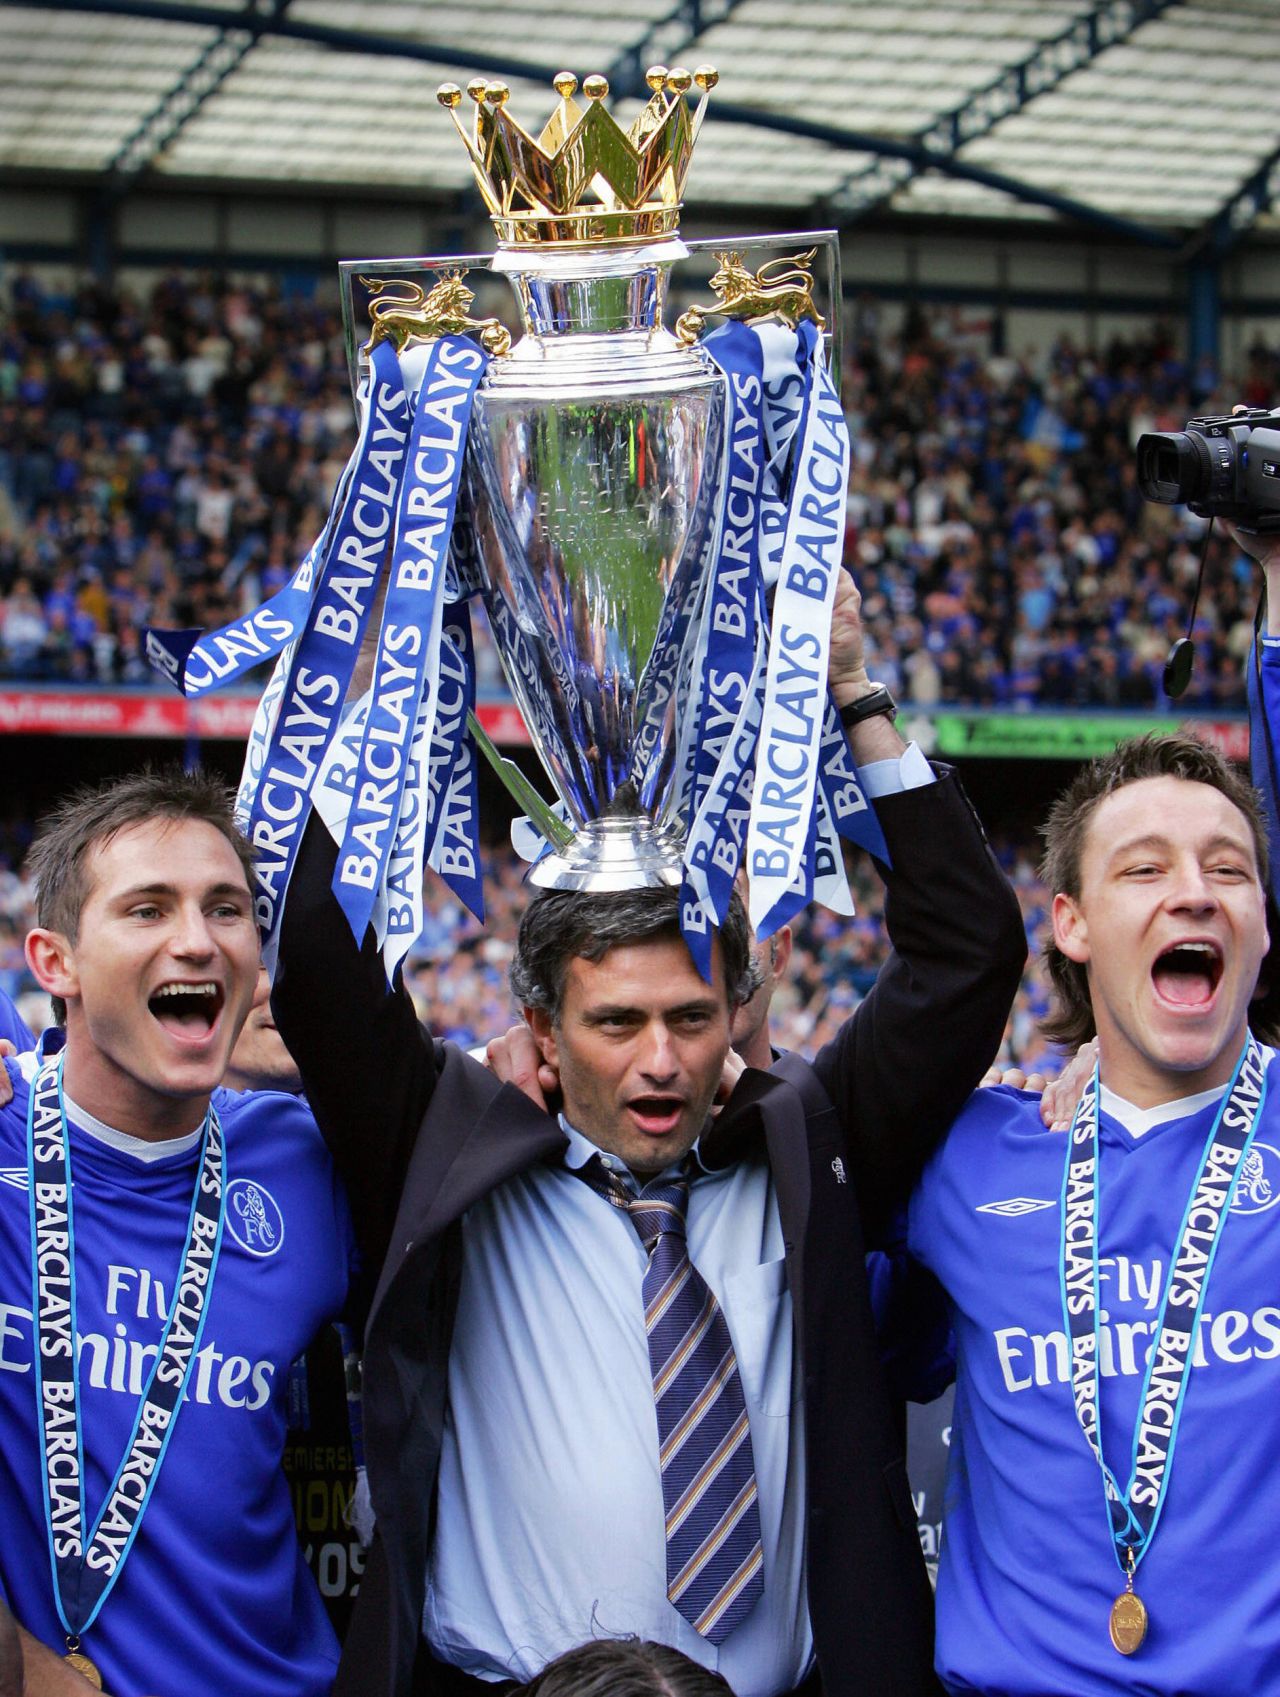 Mourinho left Porto after their European success and joined Chelsea in June 2004, declaring at his first press conference: "I am a special one." He led the club to their first English league title in over 50 years in his first season at Stamford Bridge. Frank Lampard (L) and John Terry were two of his most trusted players. He left in September 2007 after winning five major trophies.